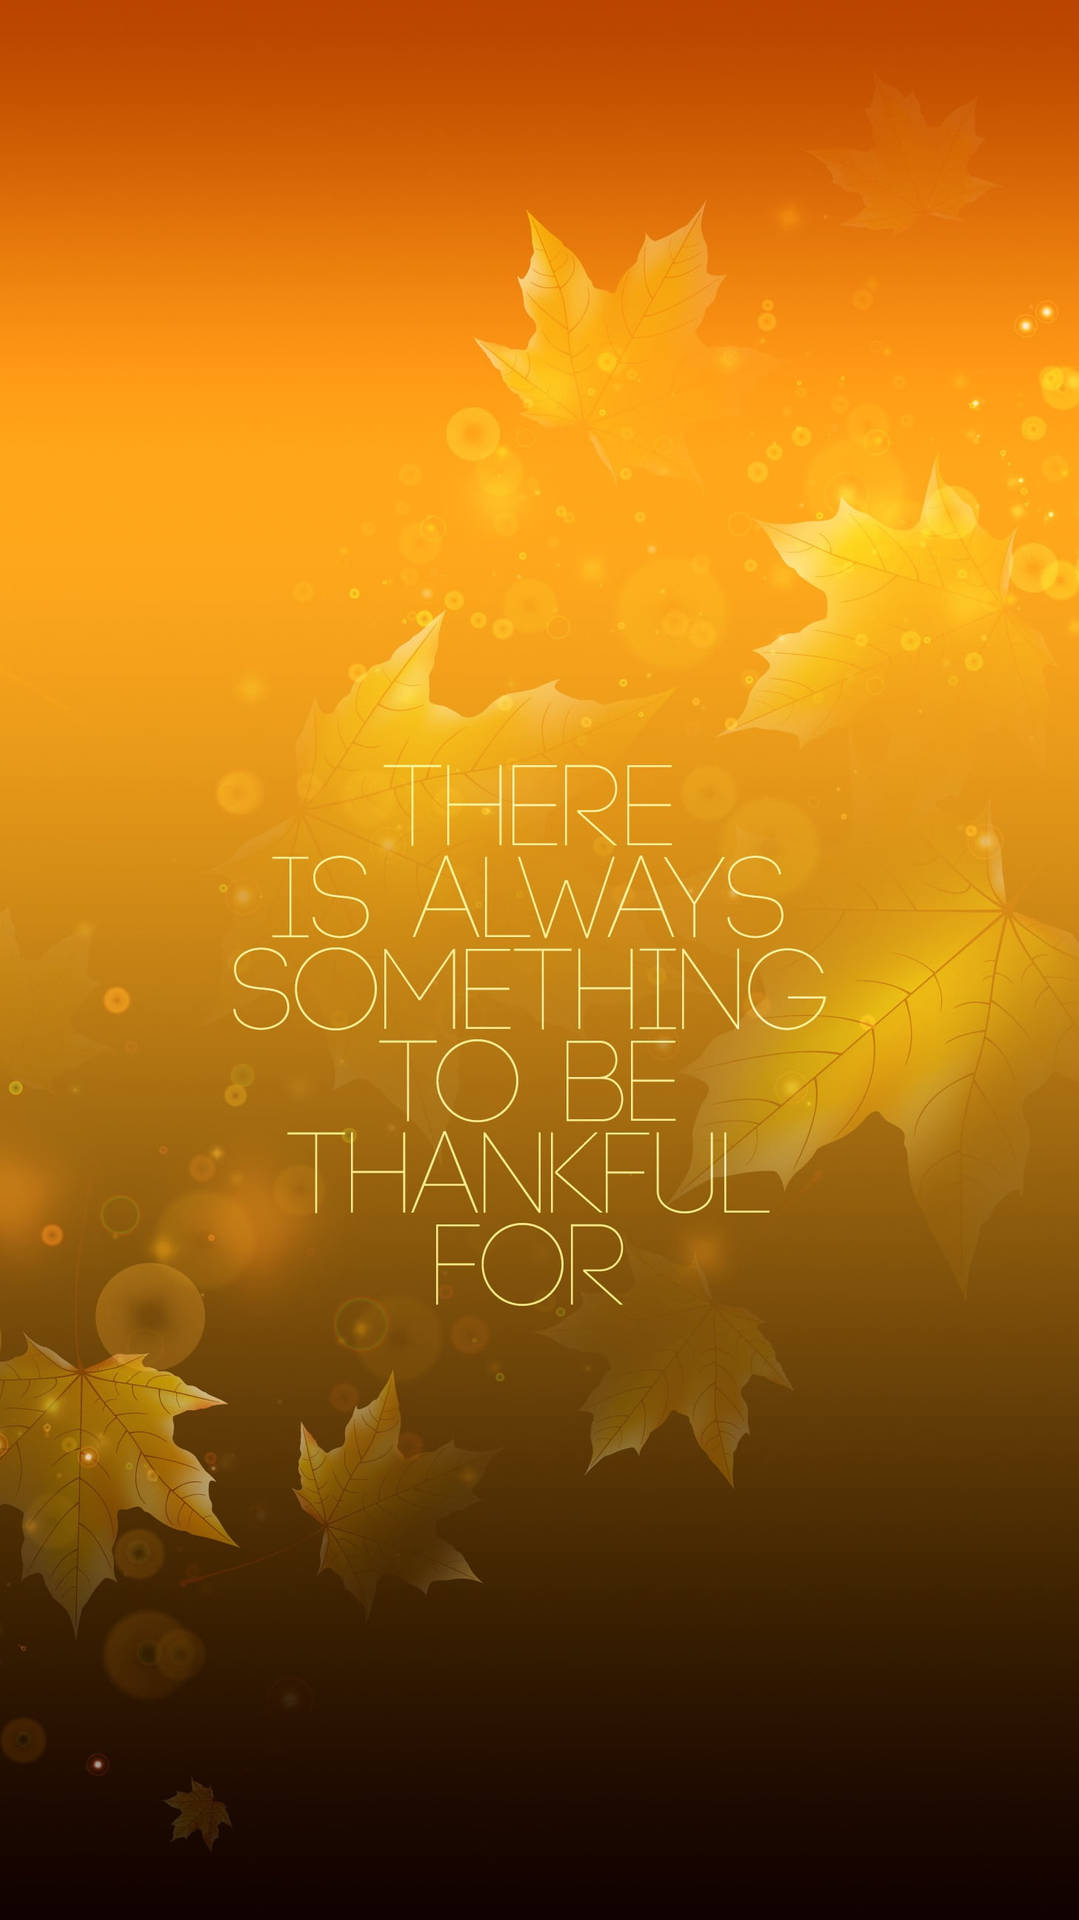 Thanksgiving Greeting On Gradient Iphone Background